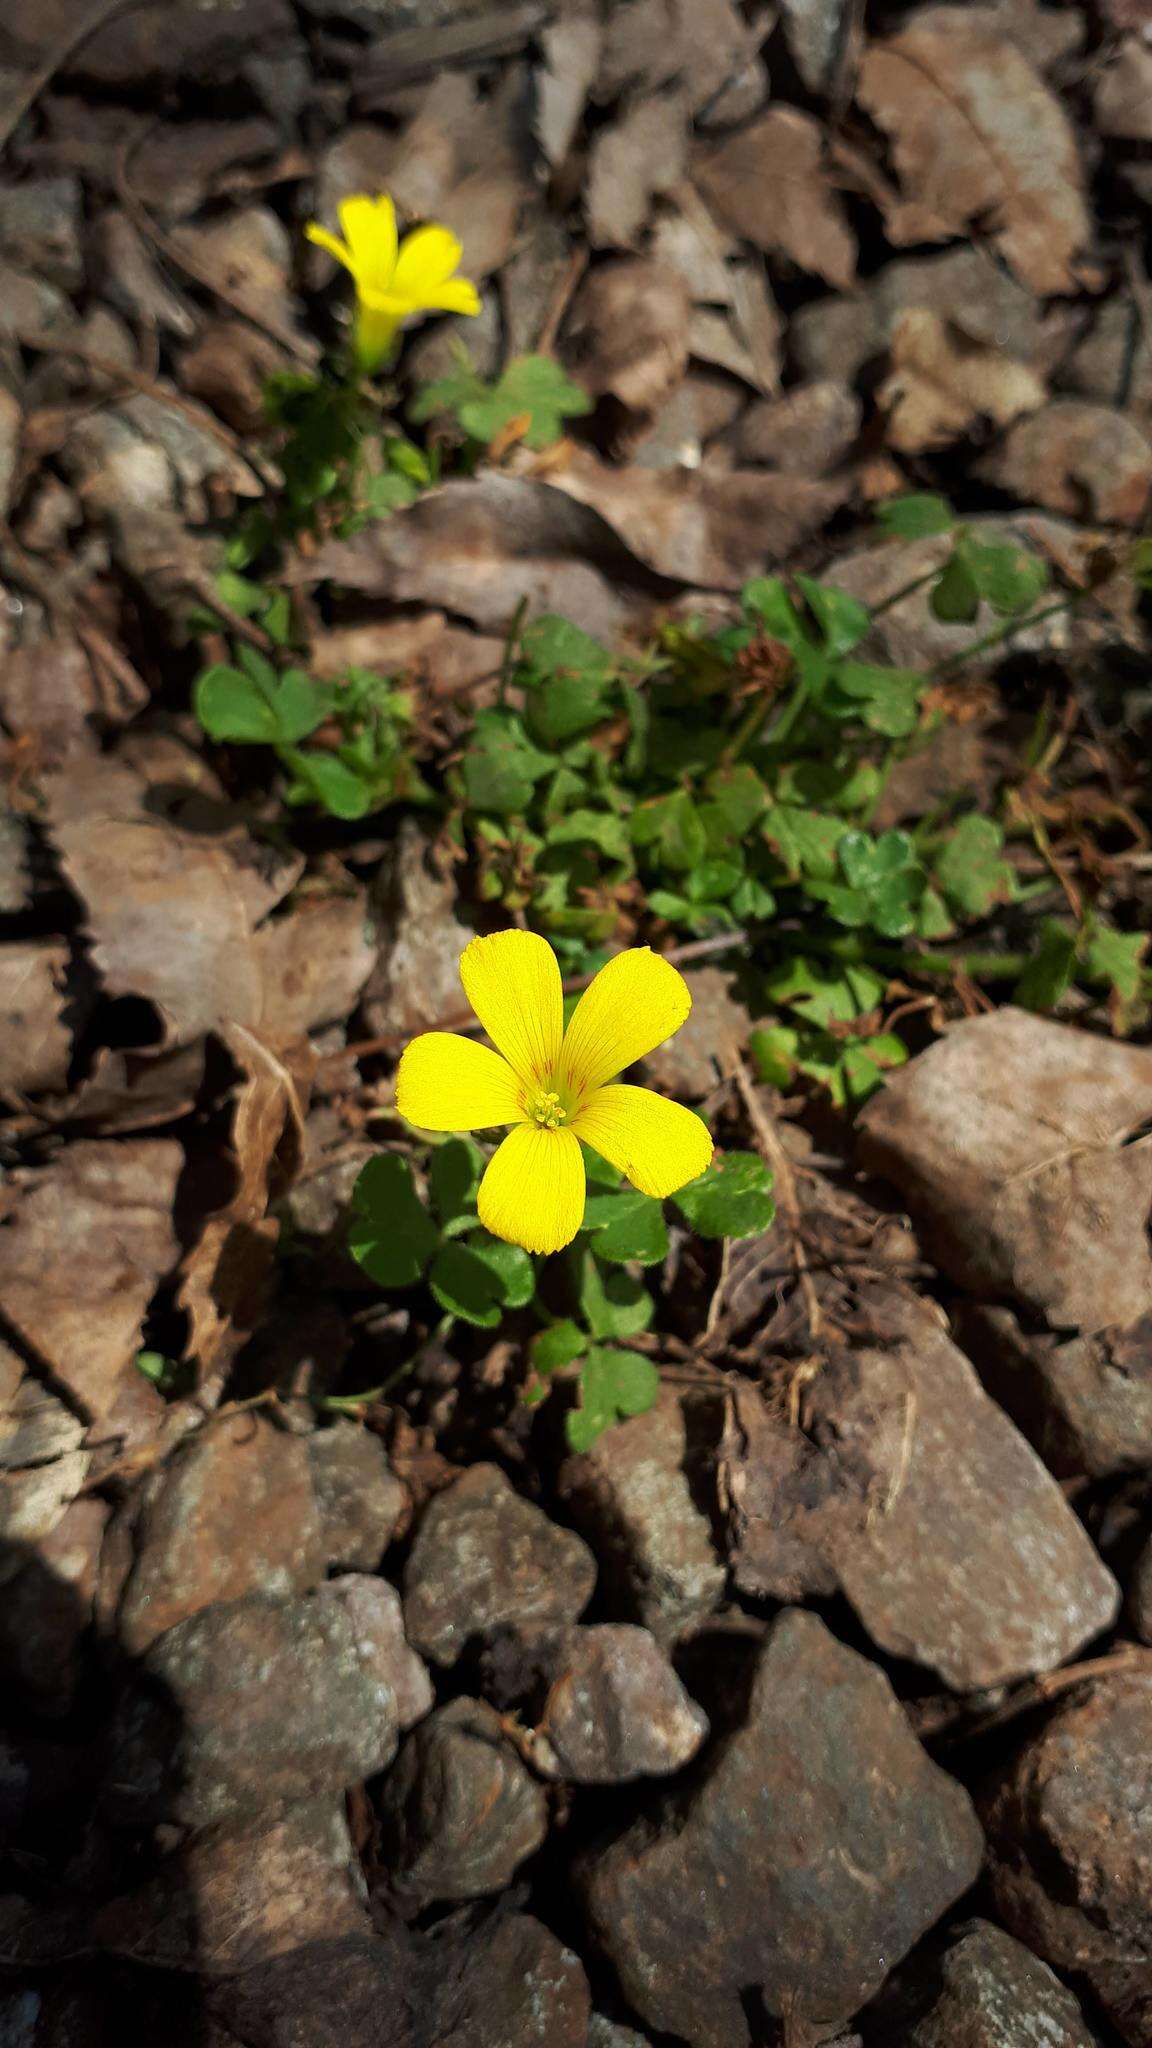 Image of Oxalis conorrhiza (Feullée) Jacquin